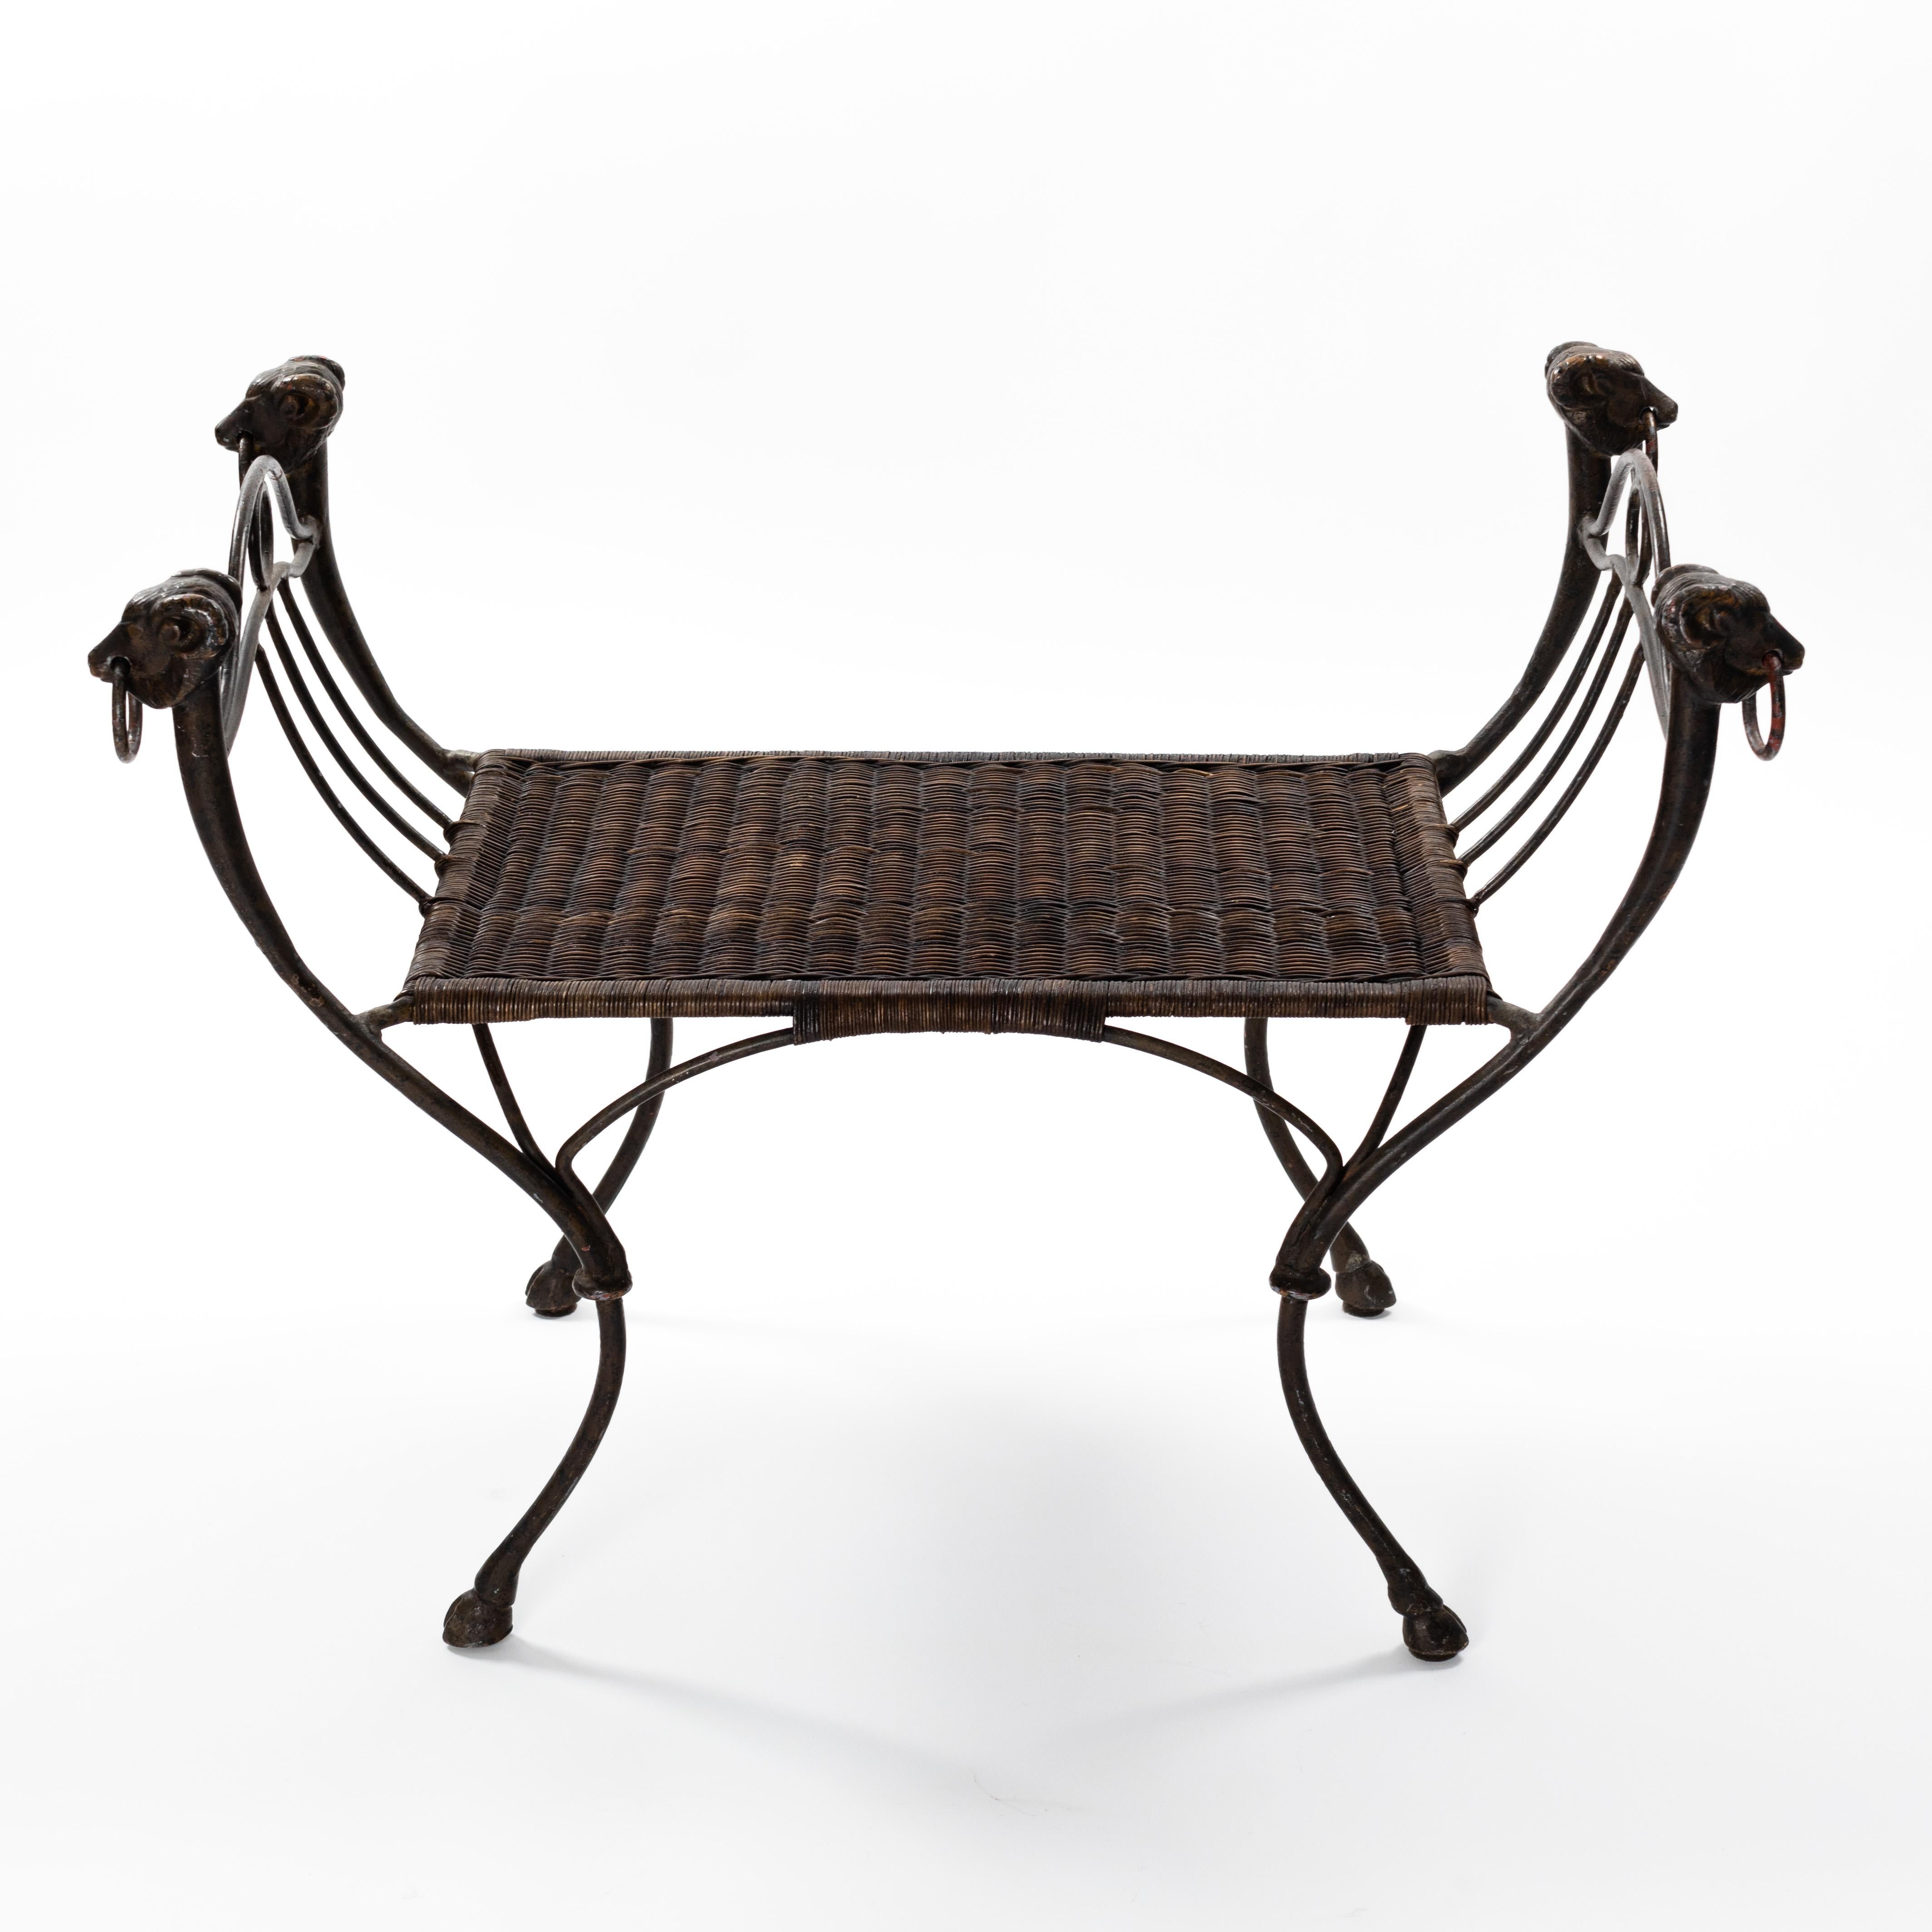 French iron bench with ratan seat wickerwork from the 1940s

Very decorative and light-footed iron bench with counterheads and hooves as decorative elements.
The connecting elements are rounded and give the object a swinging, flowing character